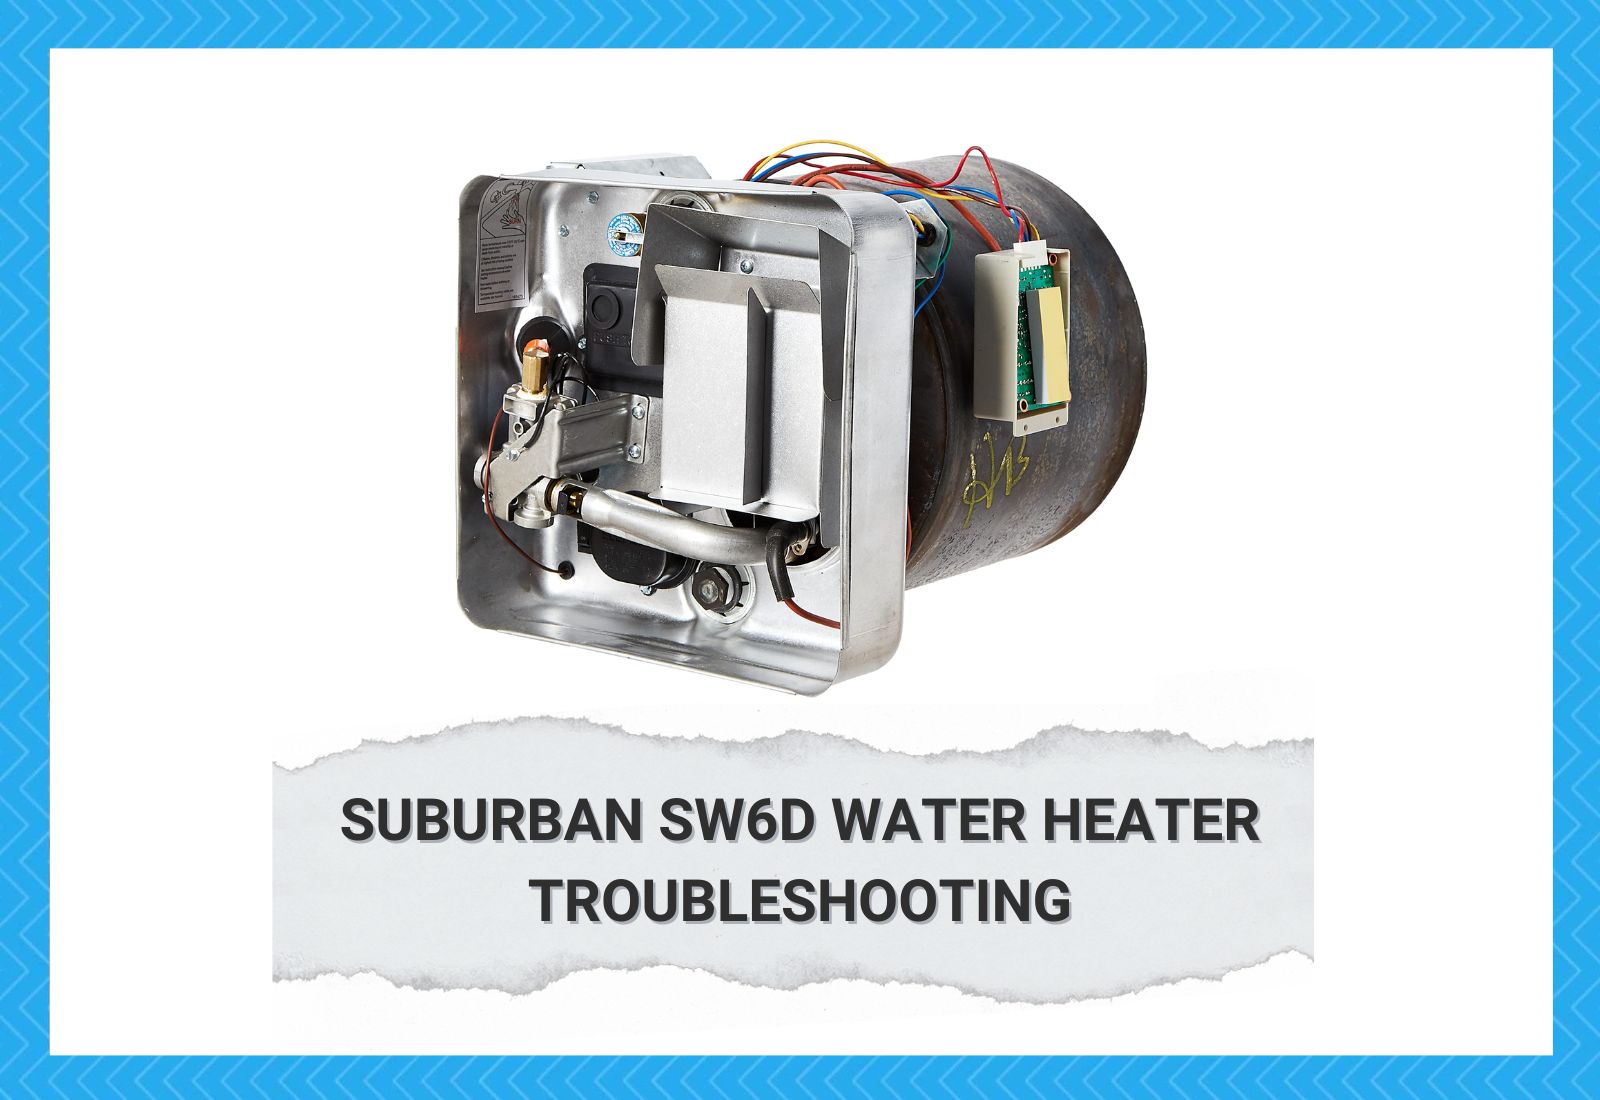 Suburban SW6D Water Heater Troubleshooting